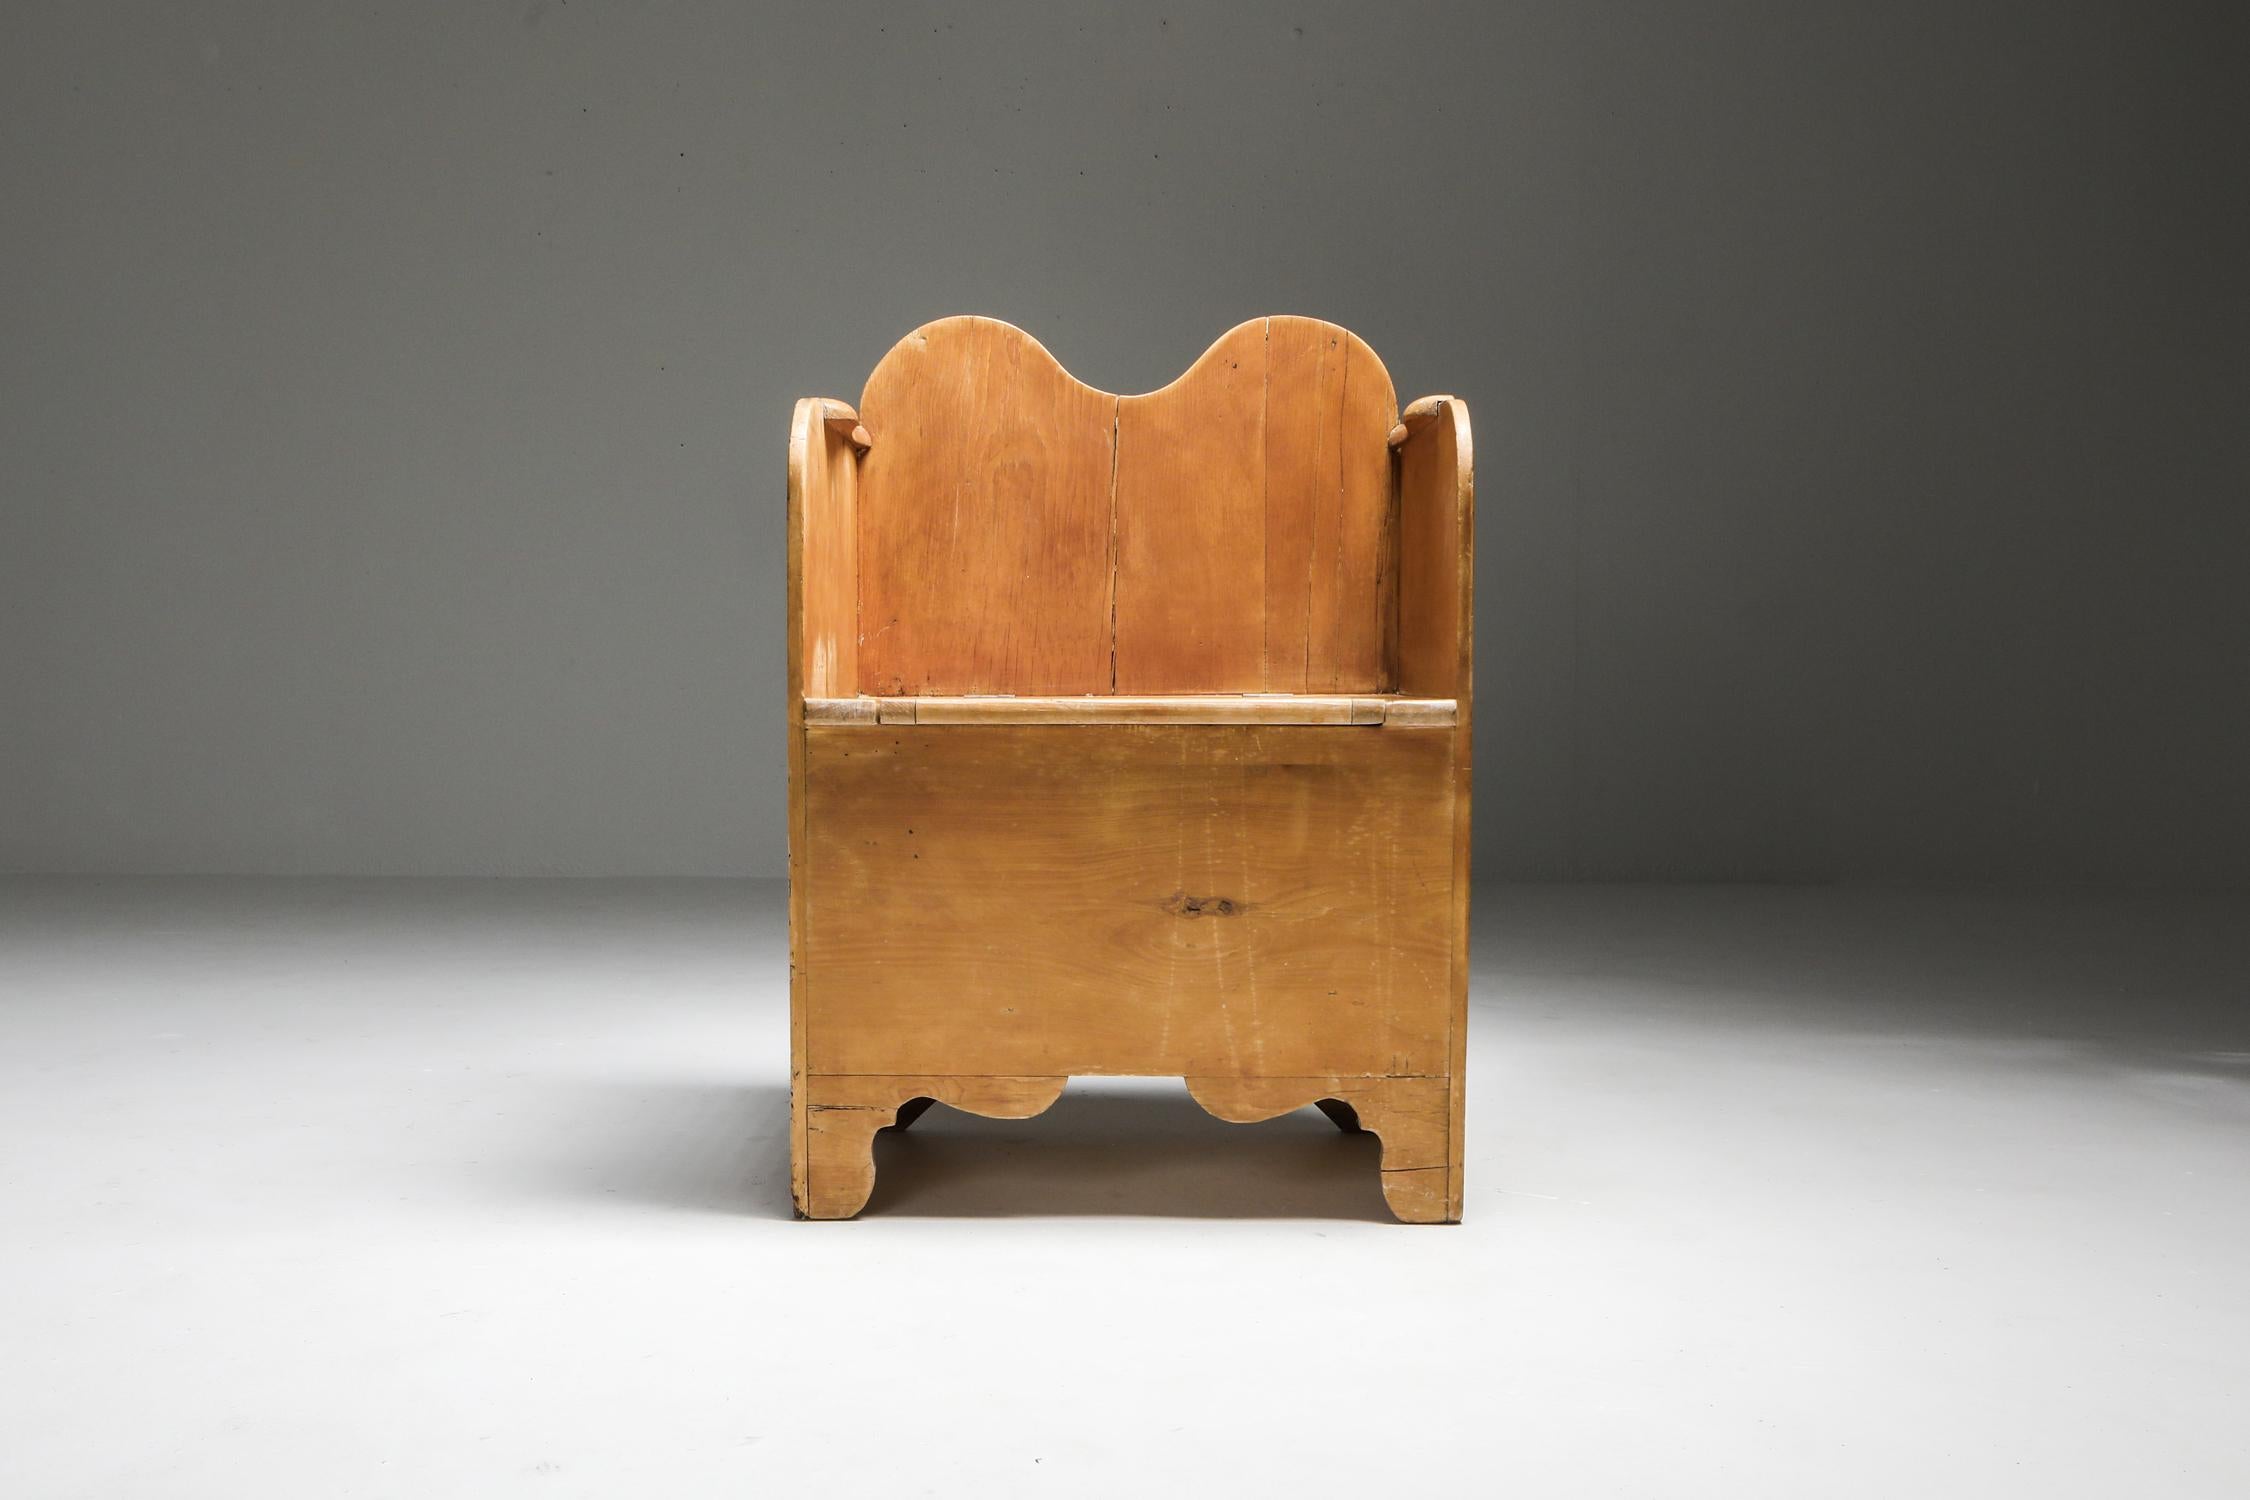 Scandinavian Modern armchair, Axel Einar Hjorth style, Sweden, circa 1940.

Primitive rustic modern armchair in pine.
Would fit well in an Axel Vervoordt inspired decor.

